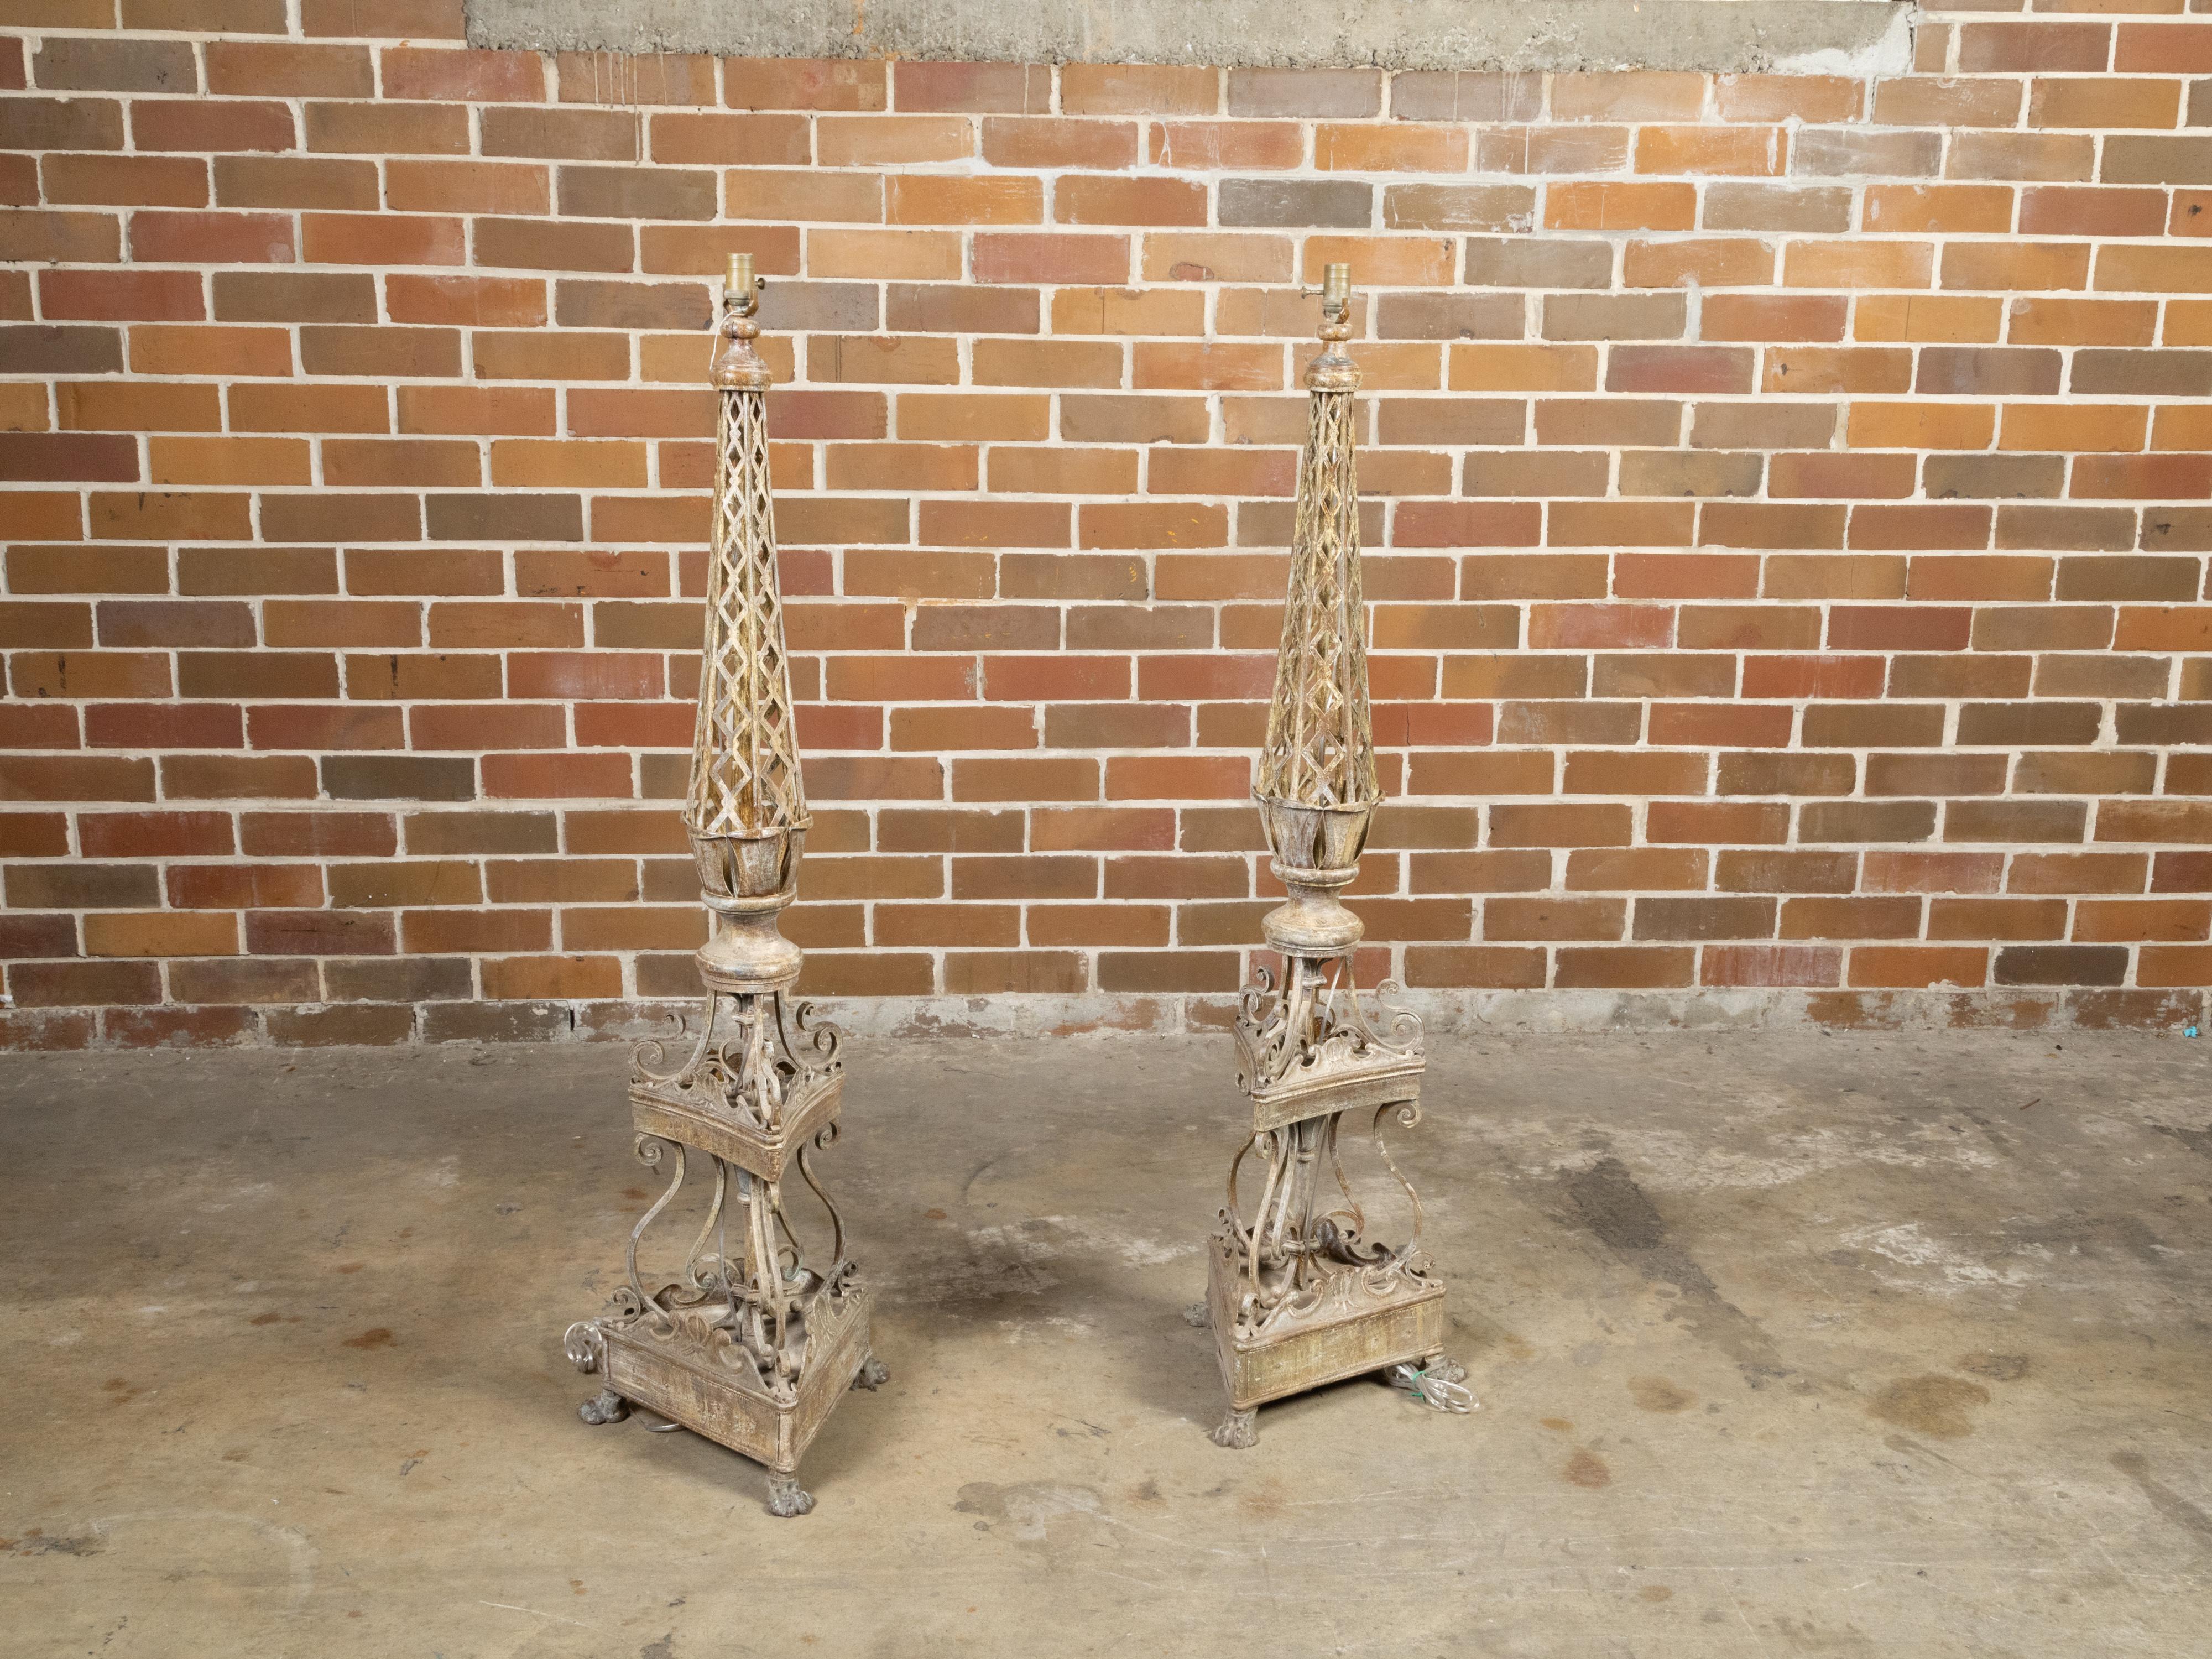 Pair of French 1920s Painted Iron Floor Lamps with Trellis and S-Scrolls, Wired 1